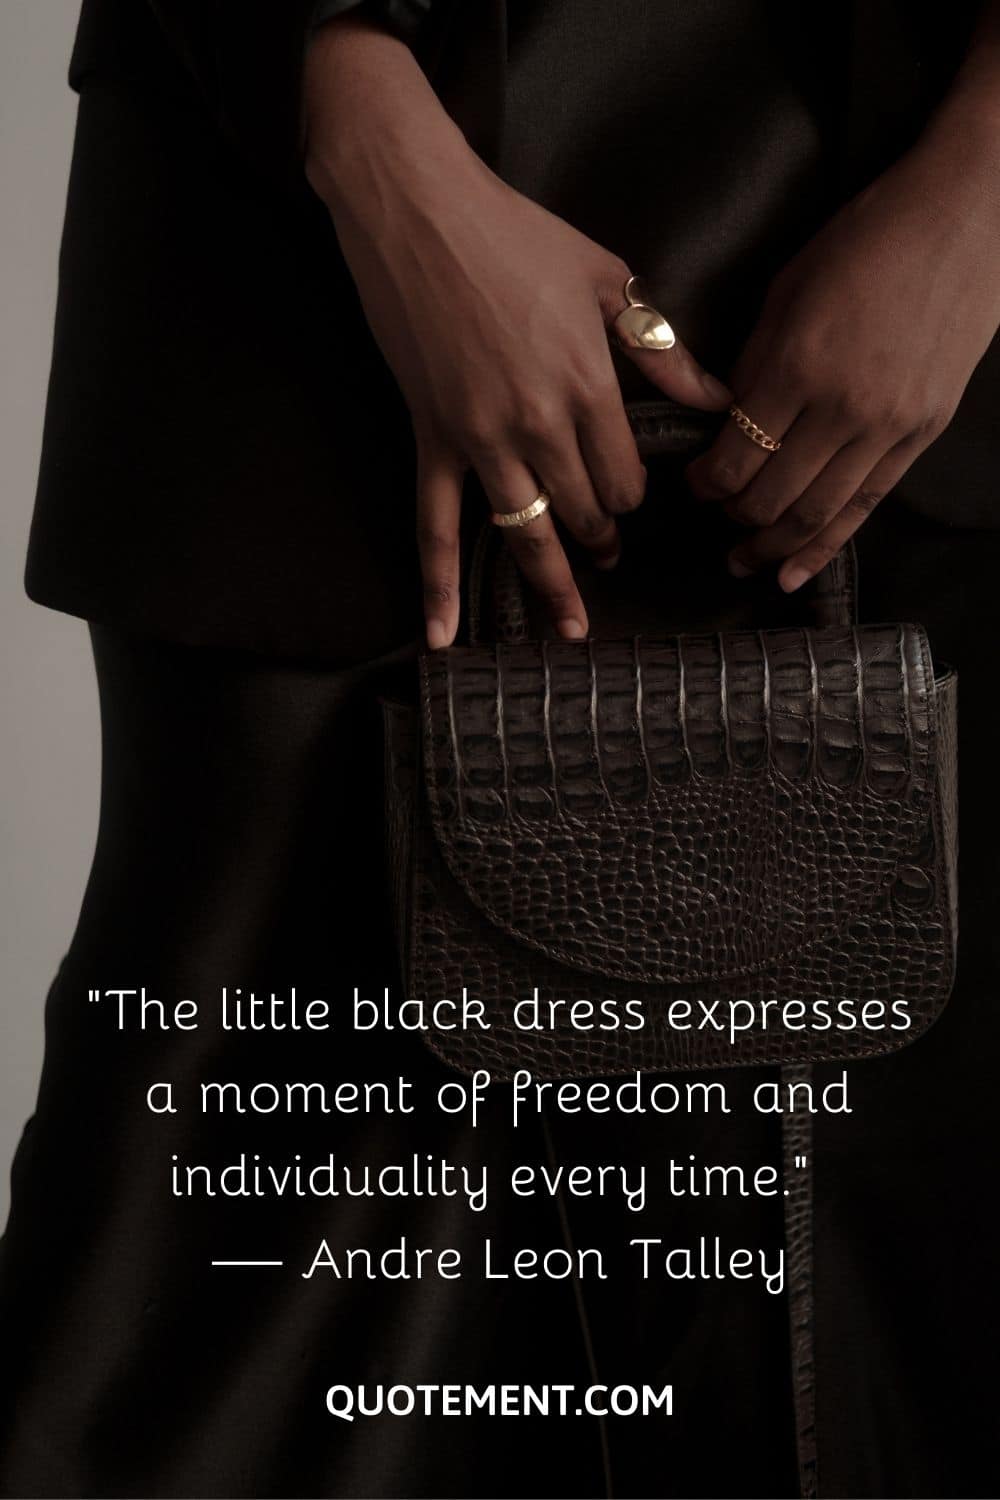 The little black dress expresses a moment of freedom and individuality